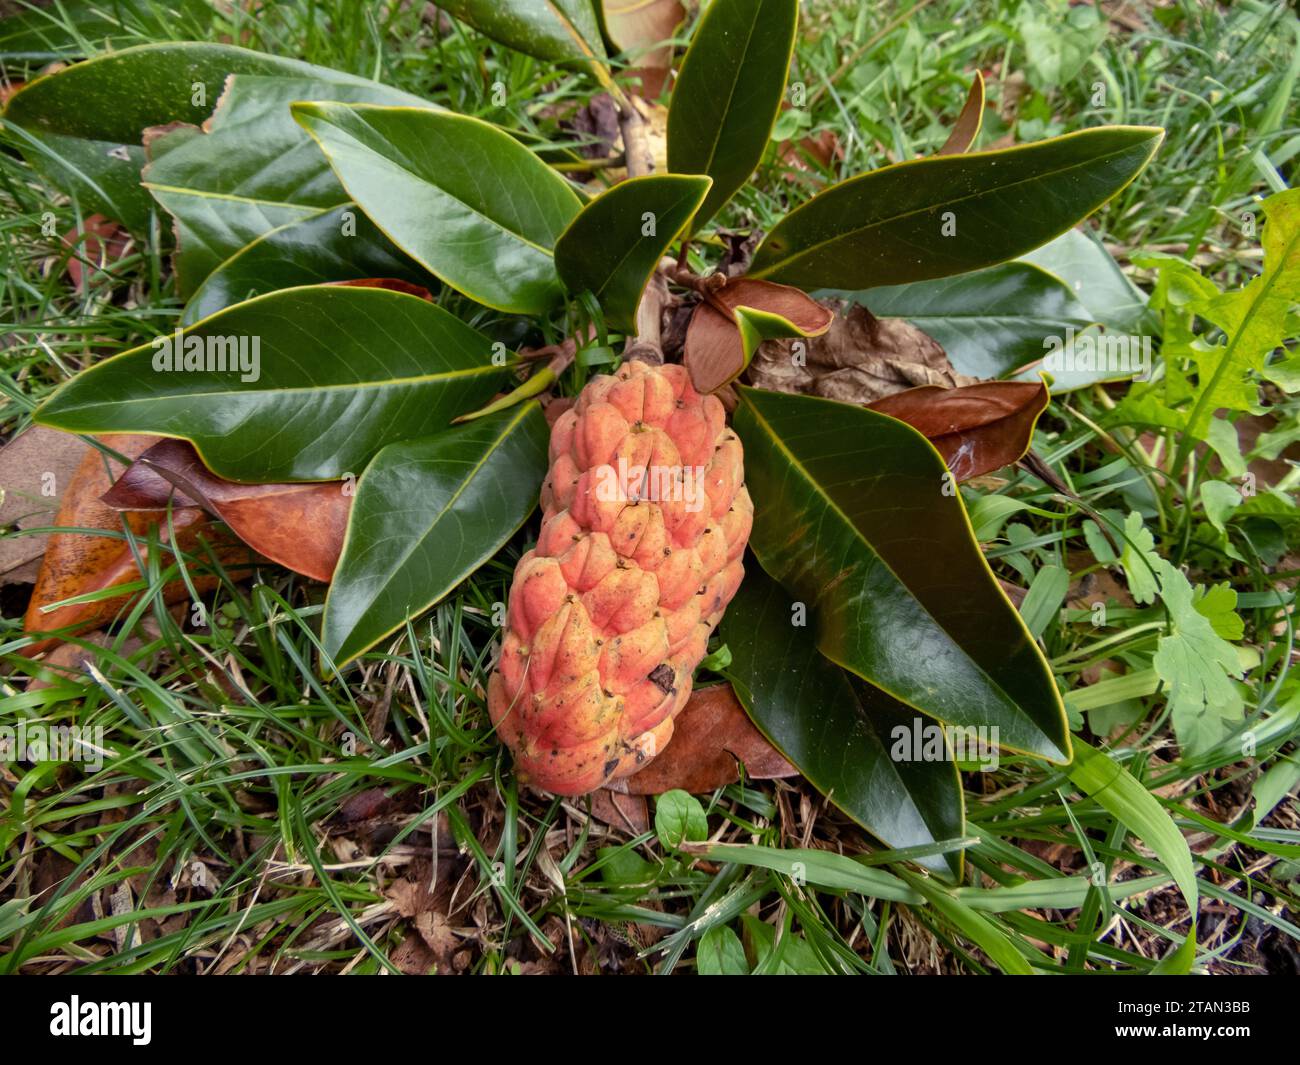 Magnolia grandiflora, southern magnolia or bull bay tree aggregate fruit and glossy leaves. A branch broken by the wind lies on the ground in the gard Stock Photo